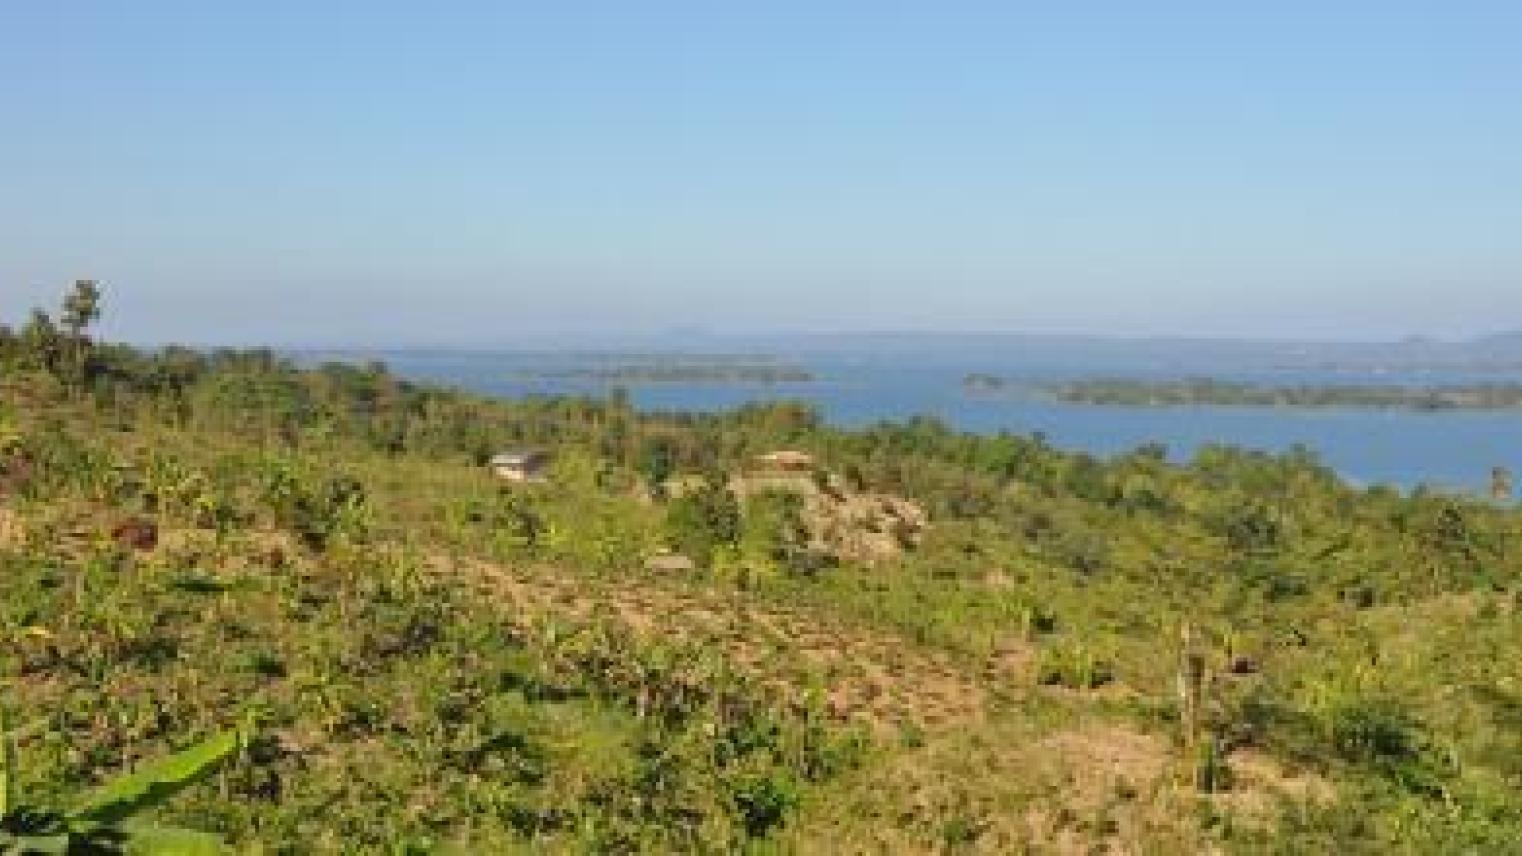 Image credit: View of Kaptai Lake, Chittagong Hill Tracts; supplied by the presenter